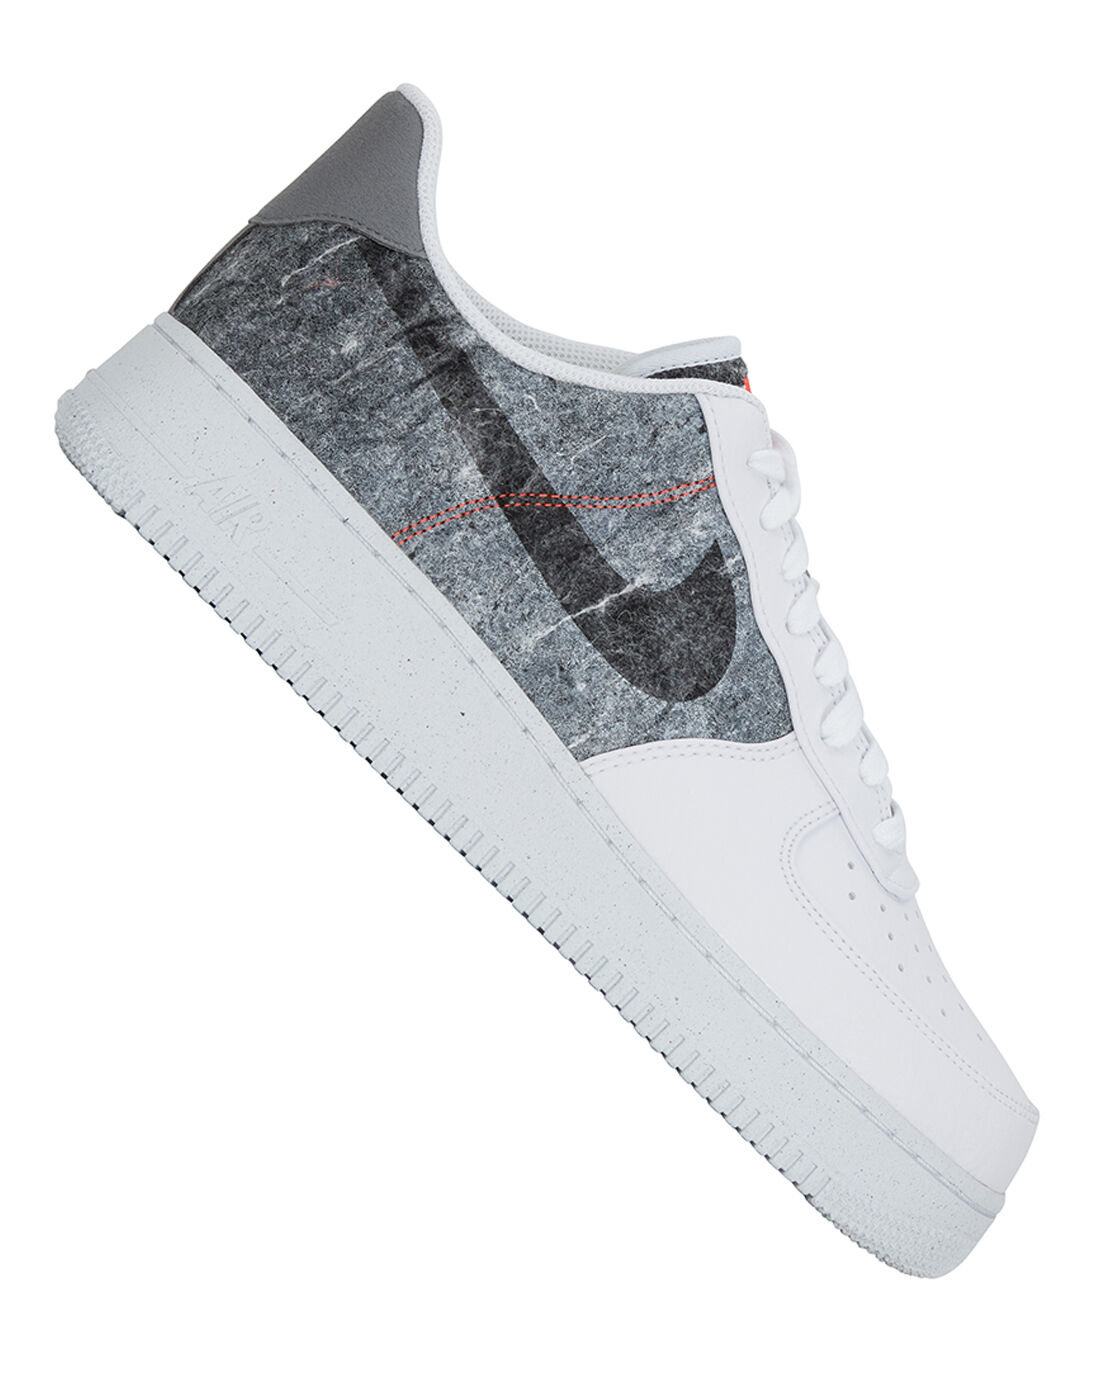 half size down air force 1